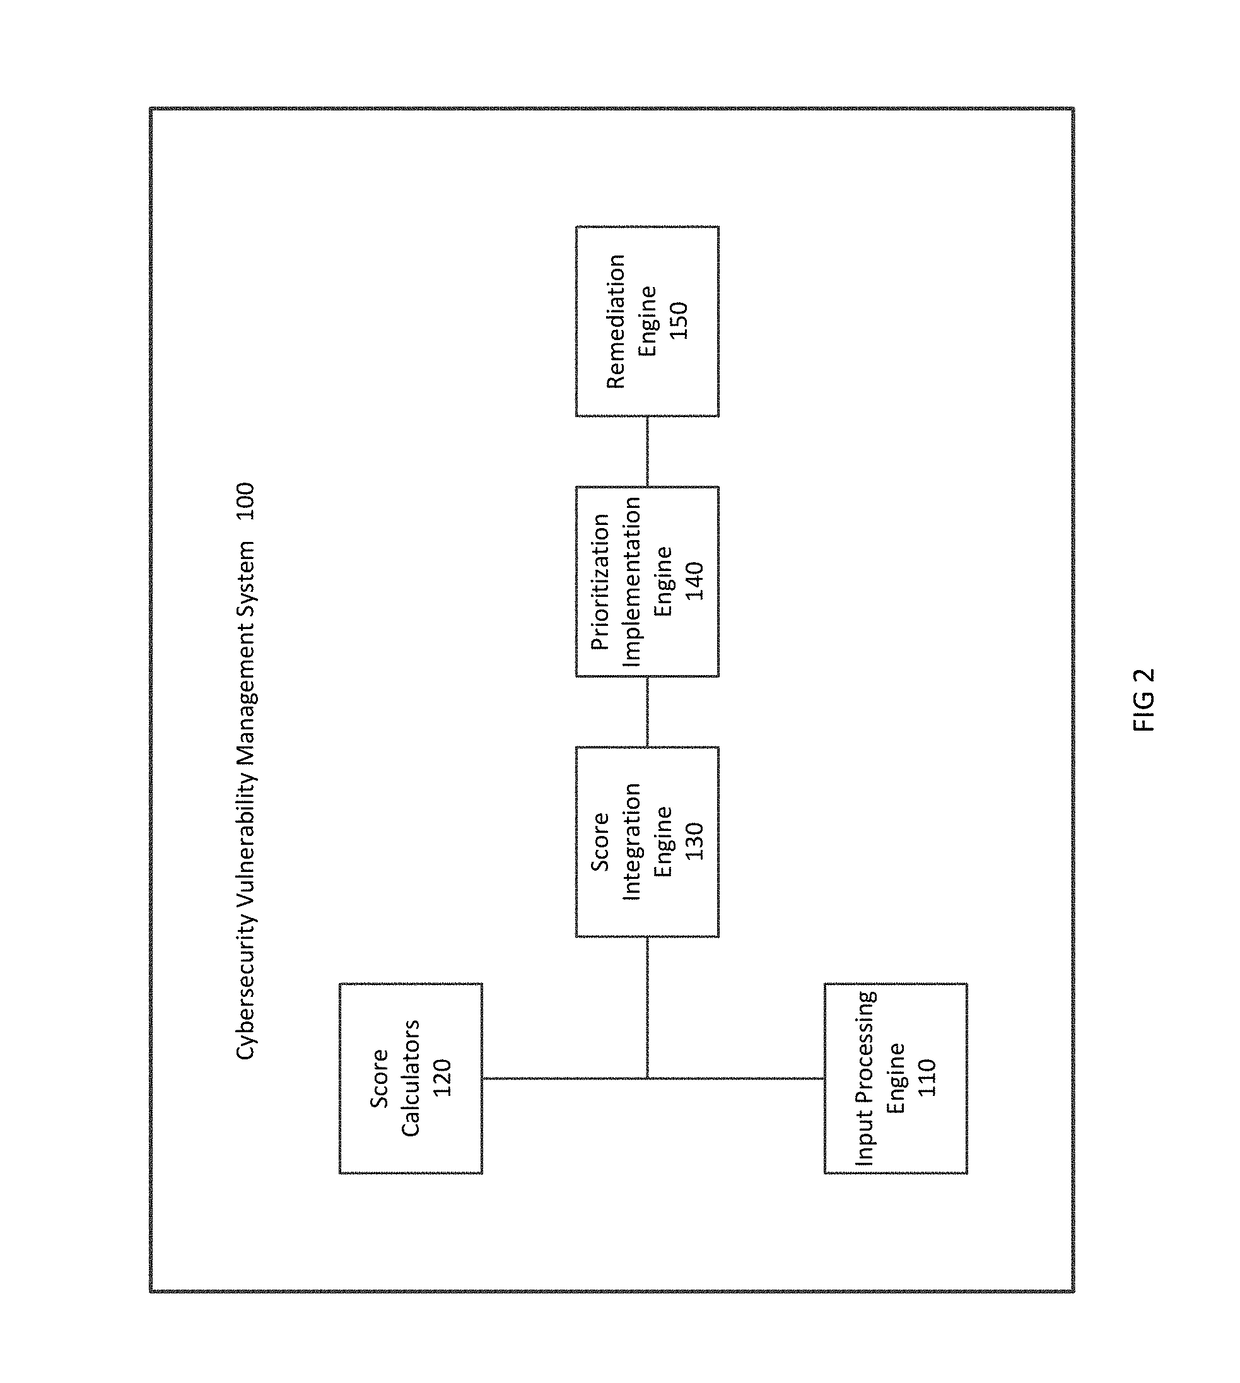 Cybersecurity Vulnerability Management System and Method